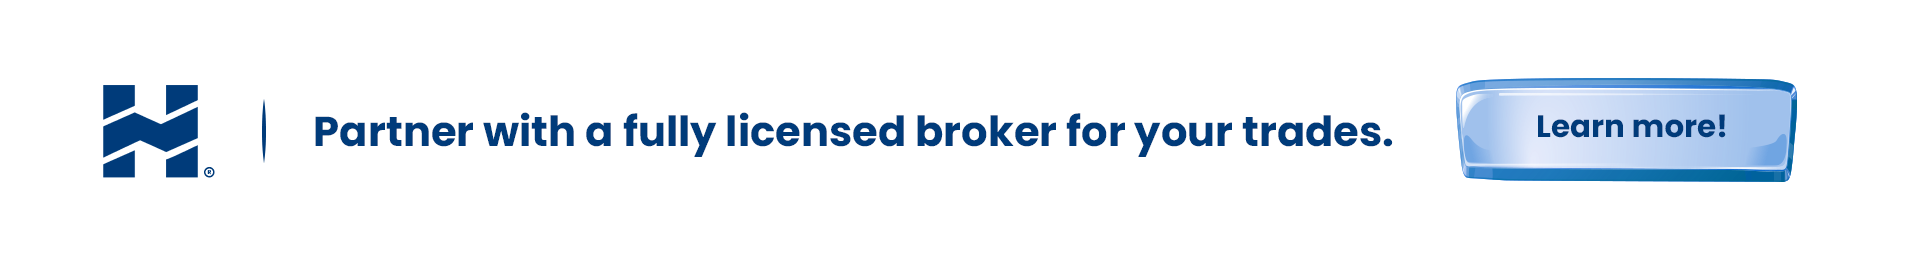 Partner with a fully licensed broker for your trades